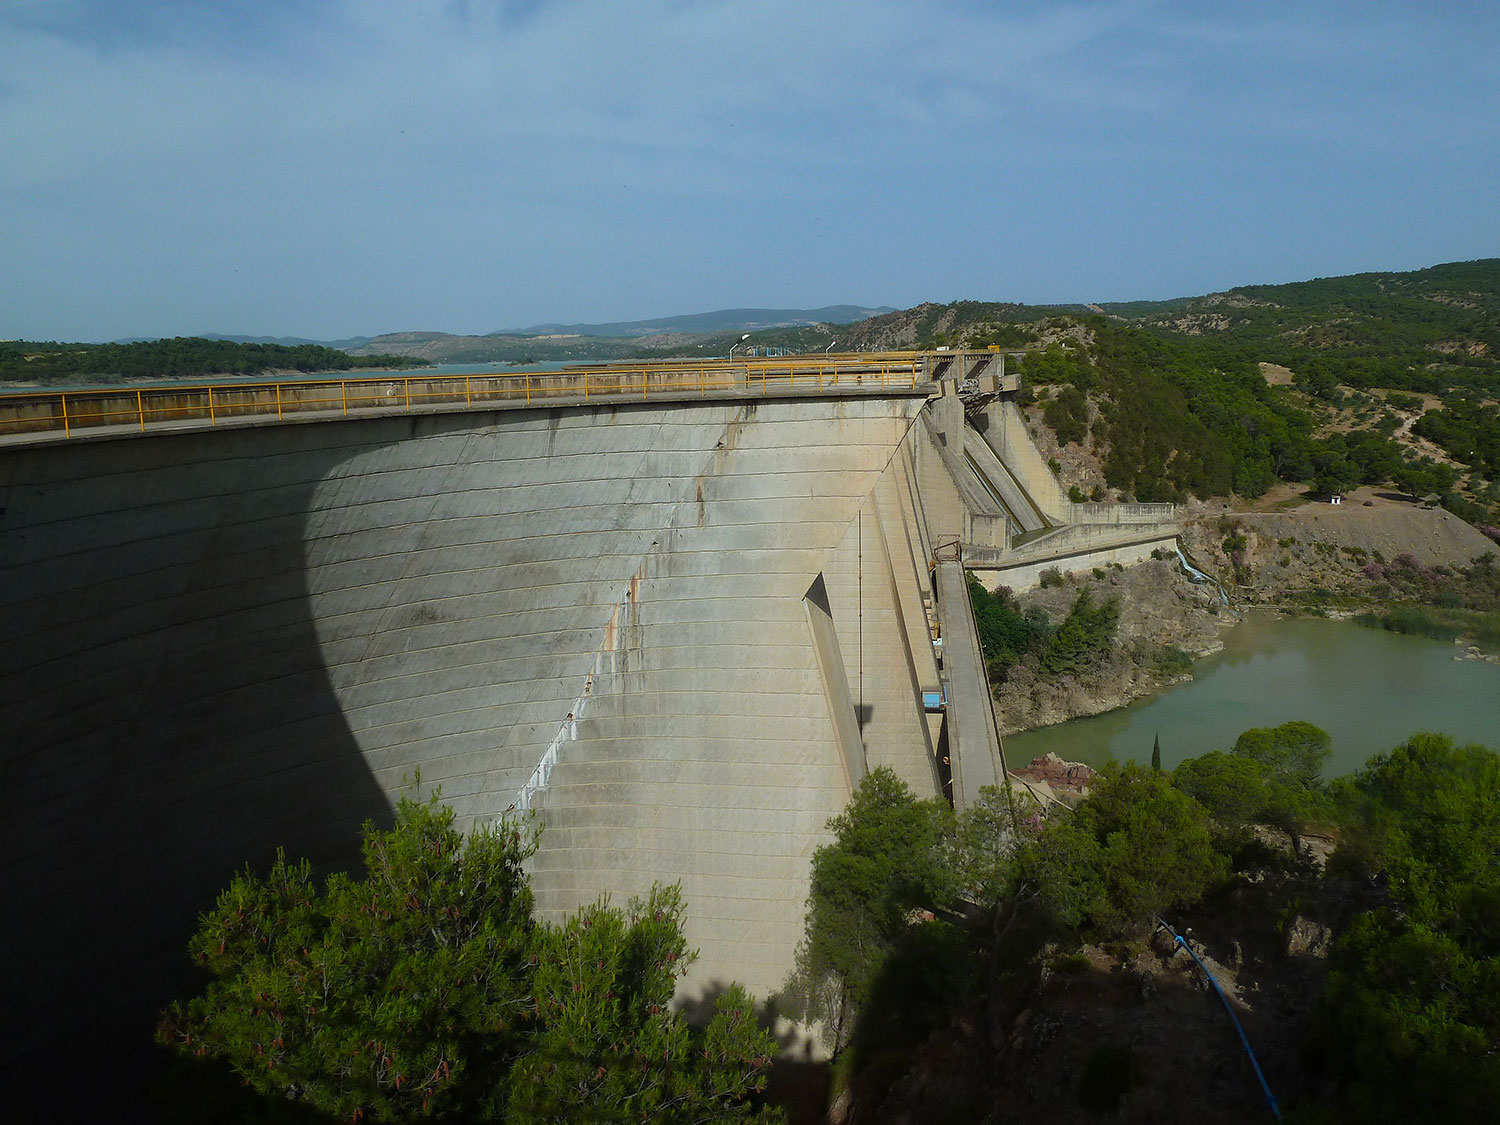 The Mellègue dam in Tunisia, located about 7 kilometers west of the town of Nebeur in the governorate of Kef. 